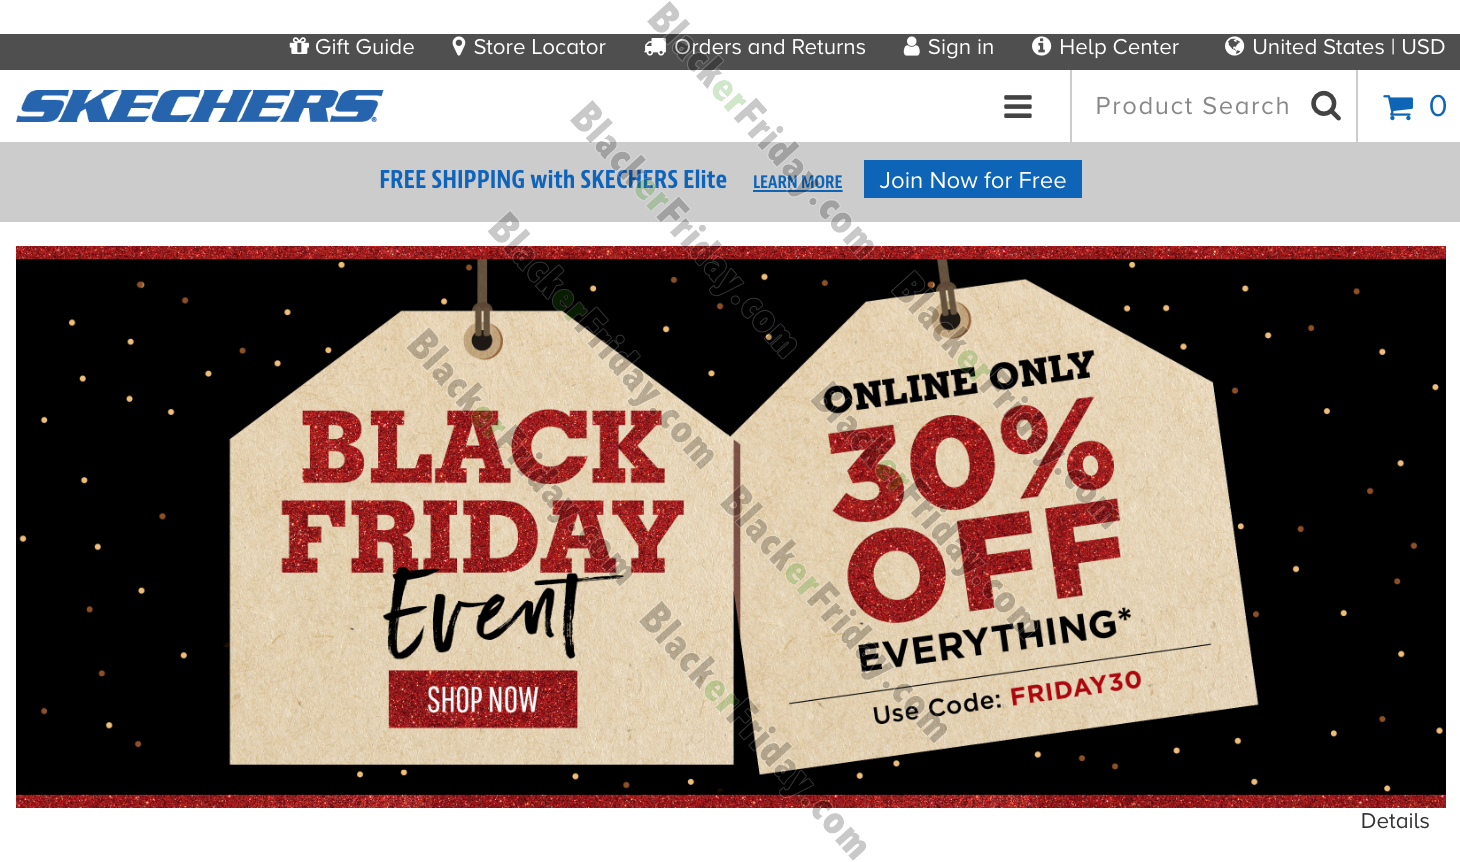 Skechers Black Friday 2021 Sale - What 